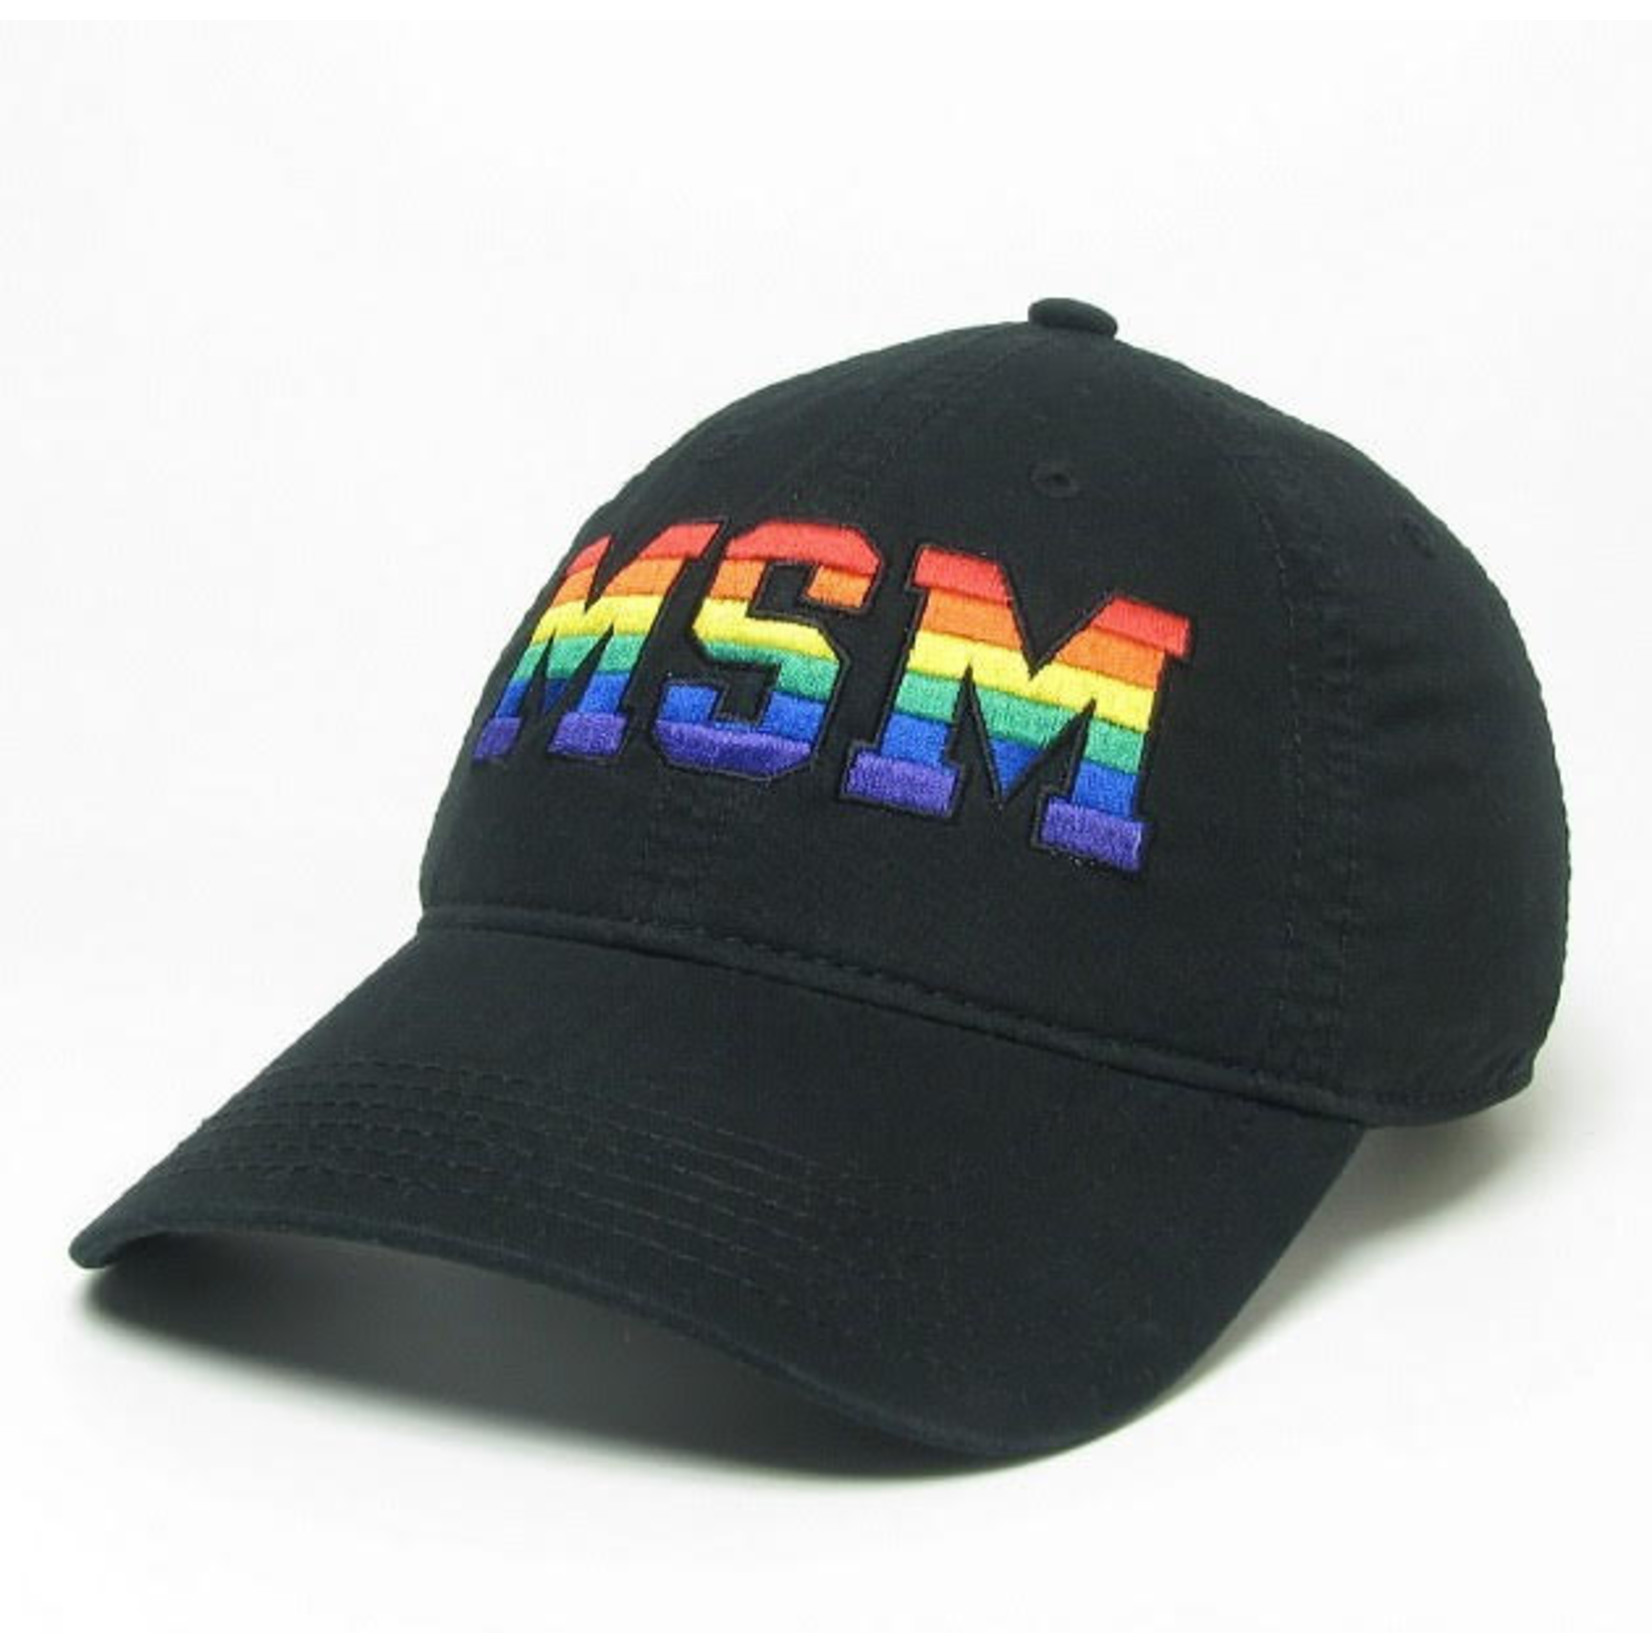 Black or White MSM Embroidered Pride Hat